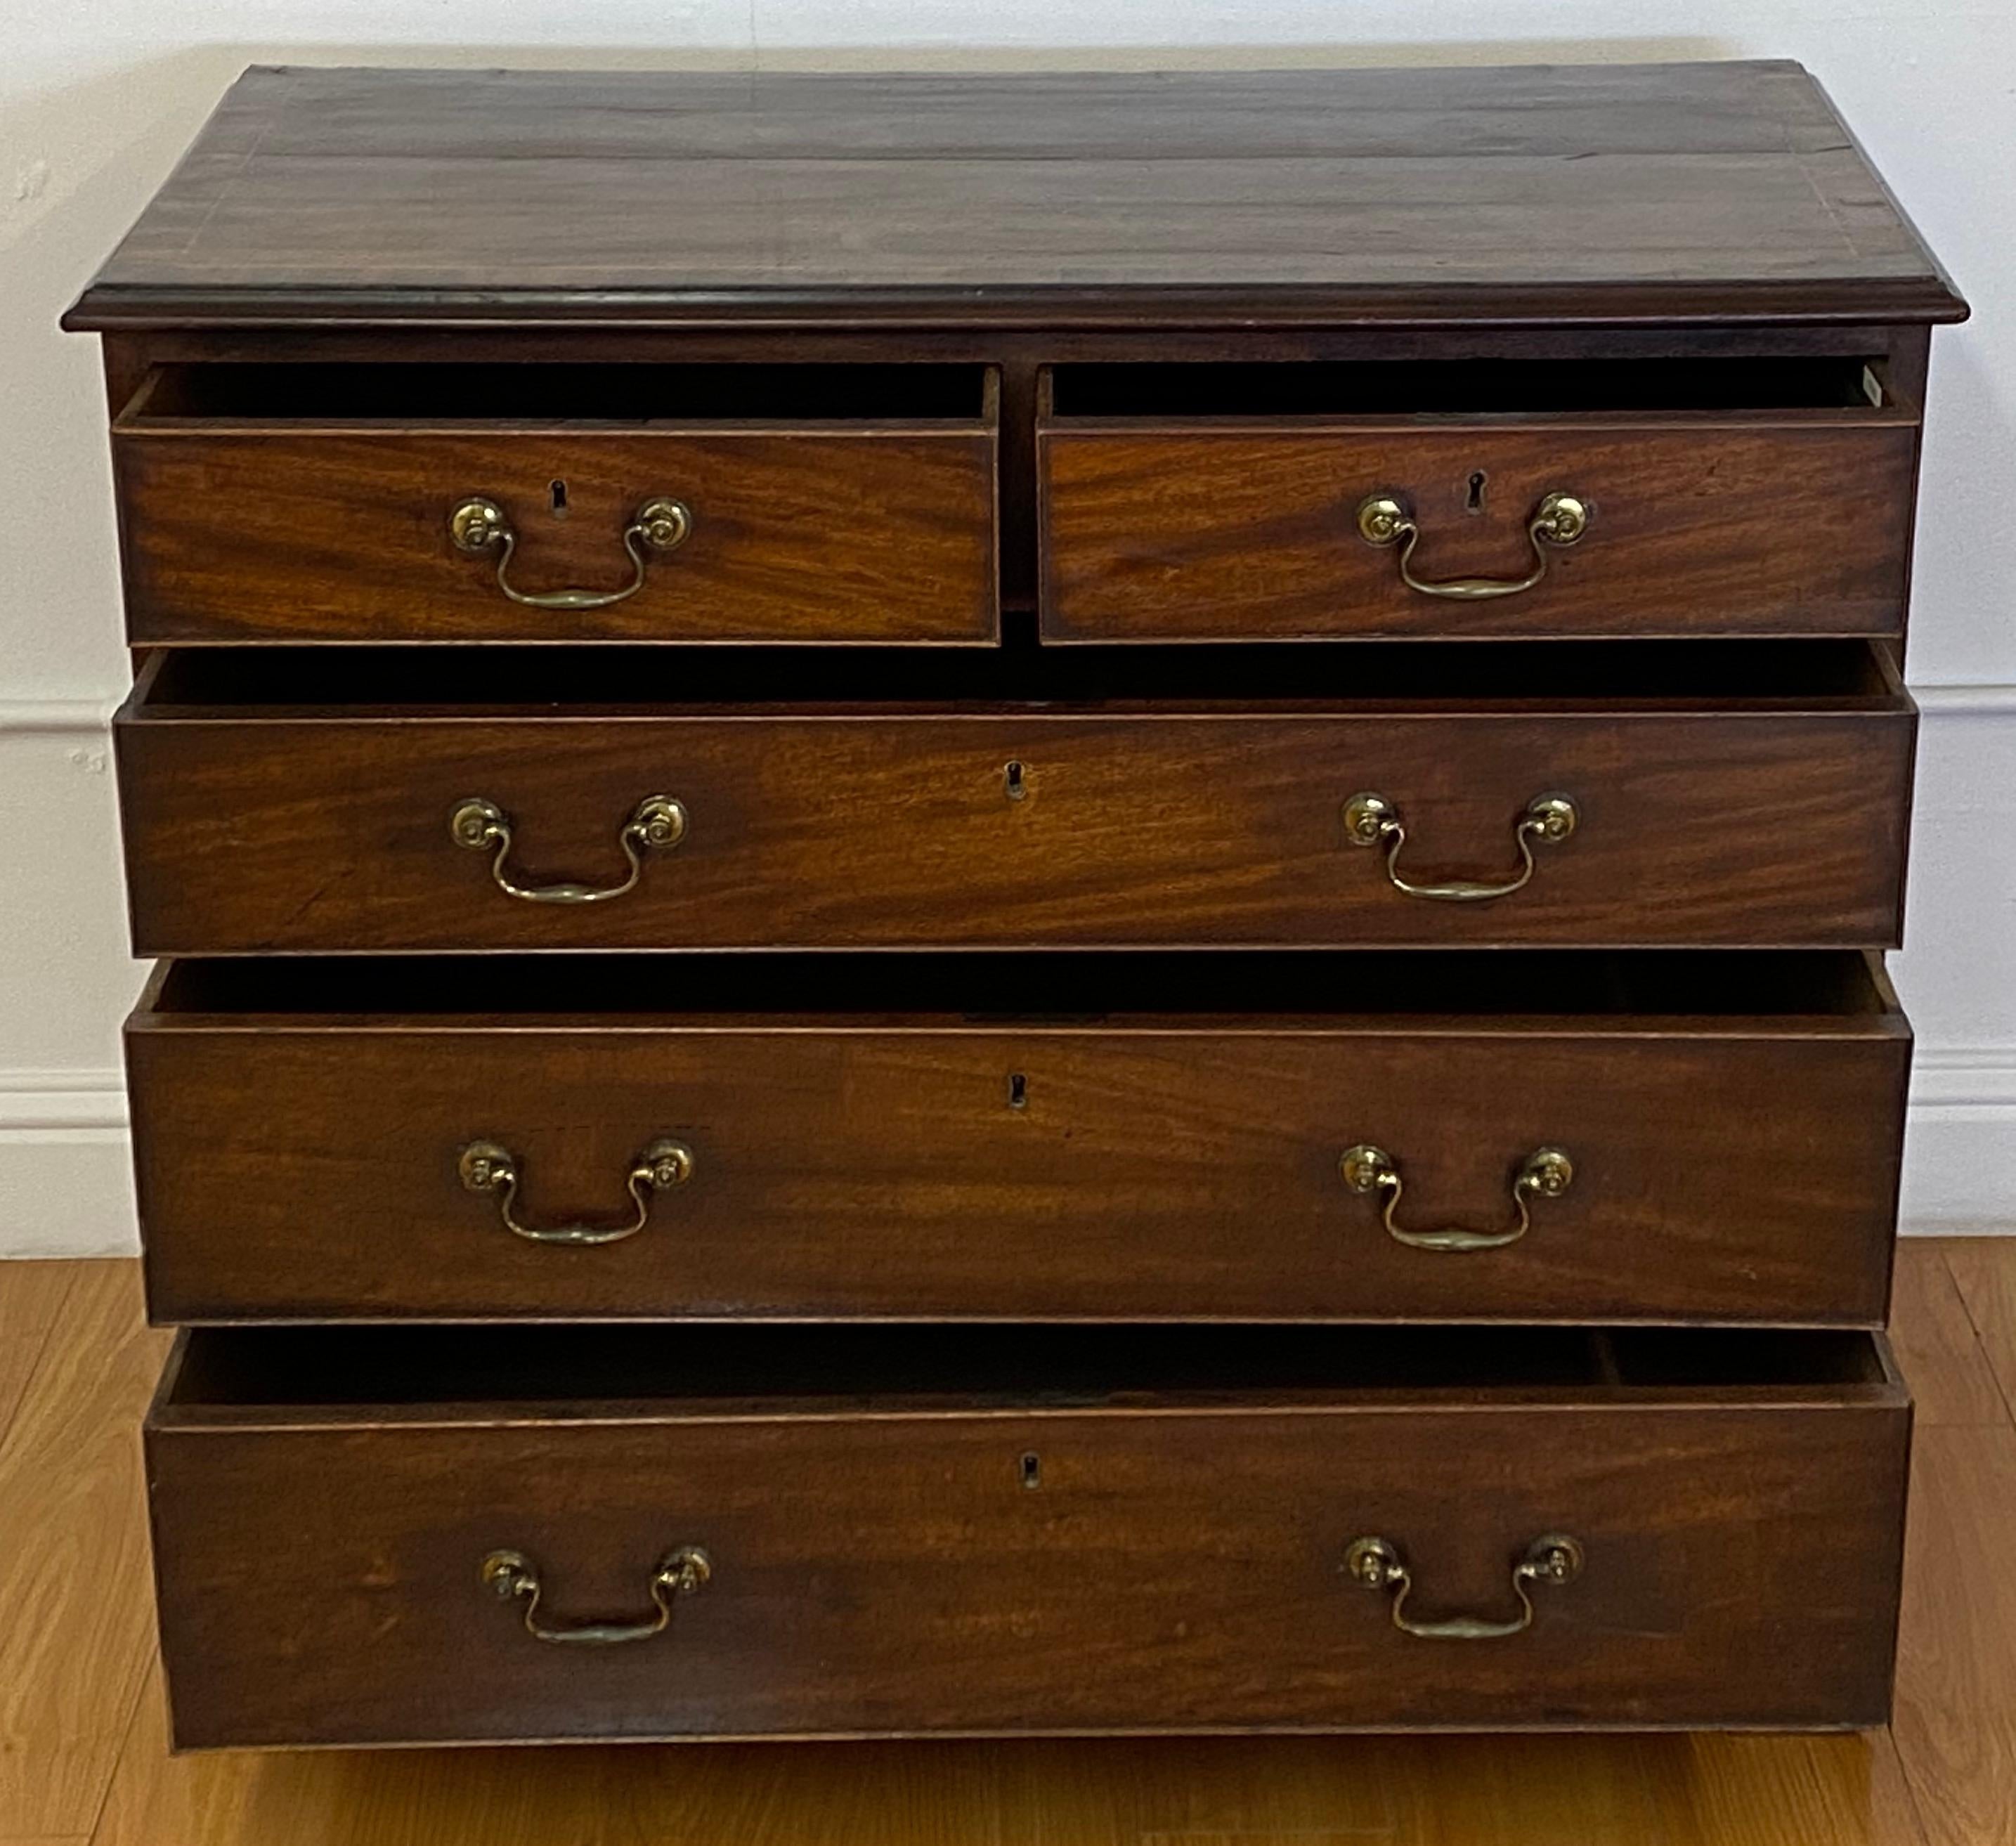 George III mahogany chest of drawers, C.1790

Two over three chest with brass swan neck pulls

Measures: 37.5